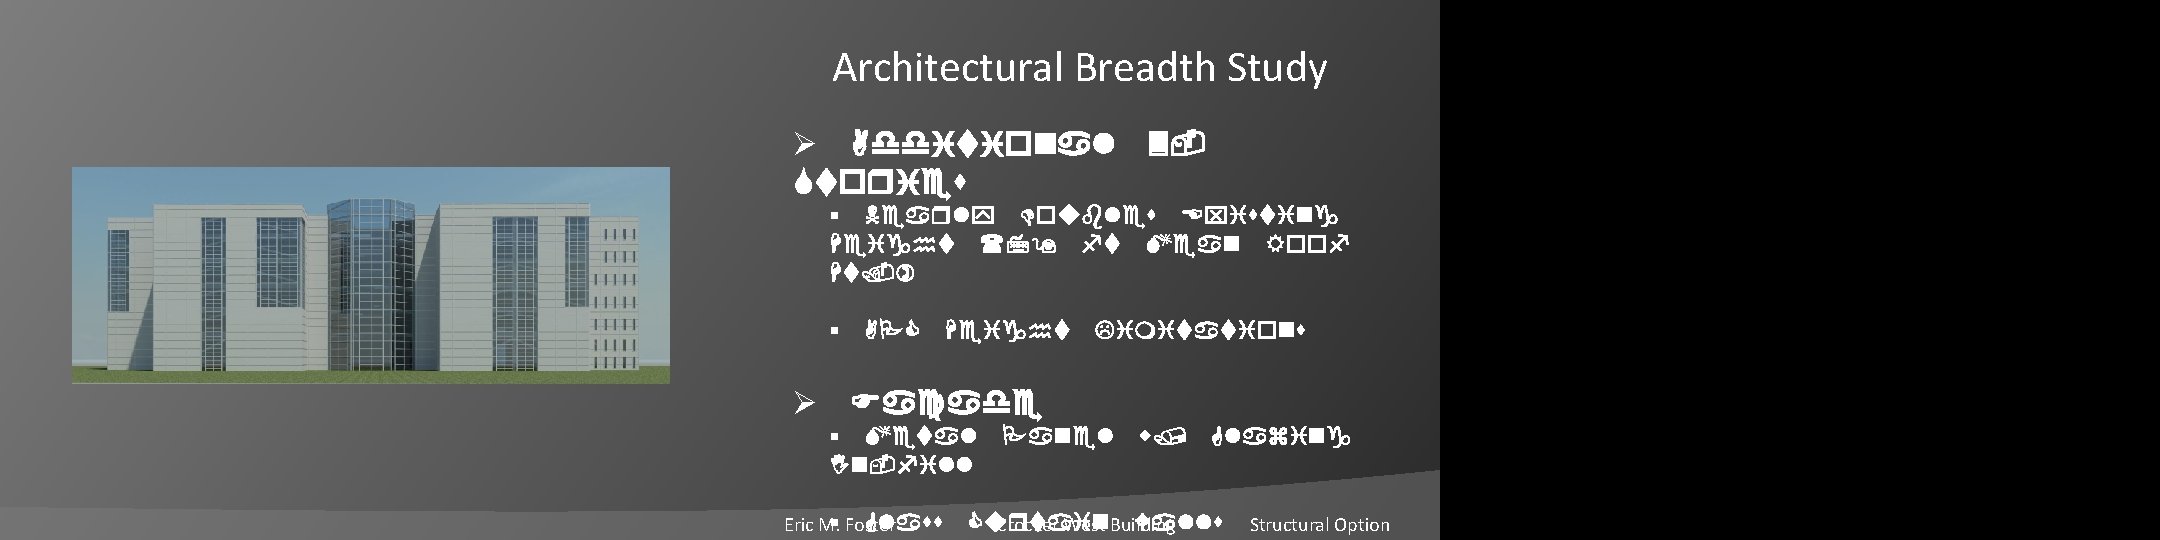 Architectural Breadth Study Ø Additional 3 Stories § Nearly Doubles Existing Height (79 ft